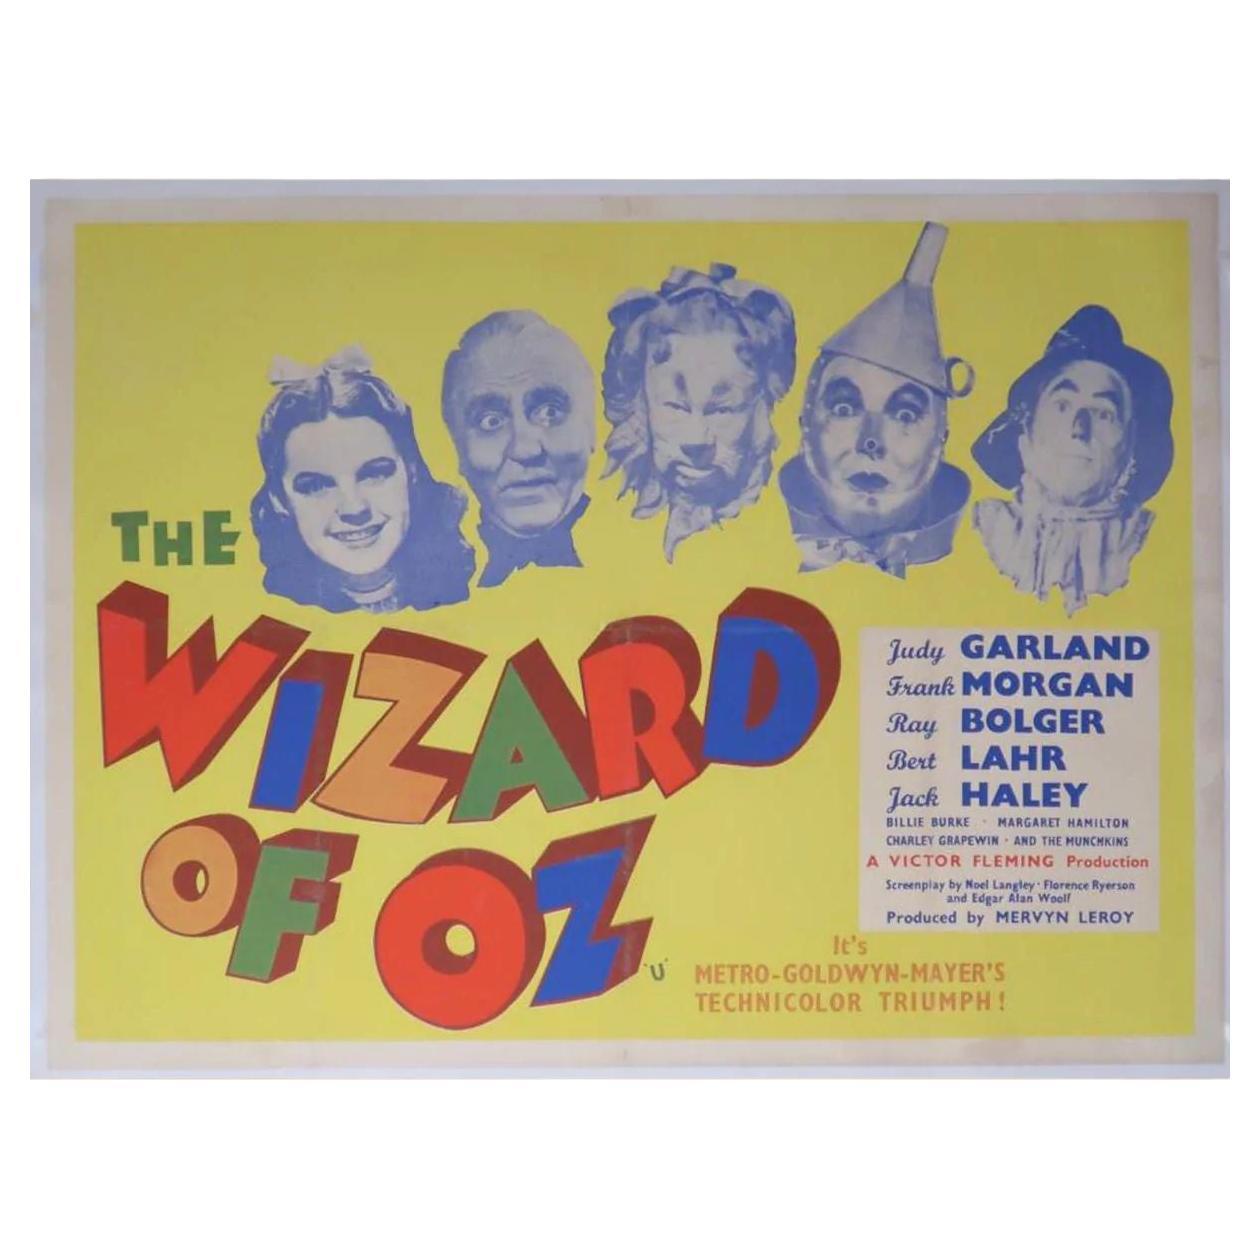 The Wizard of Oz, Unframed Poster, 1959r For Sale